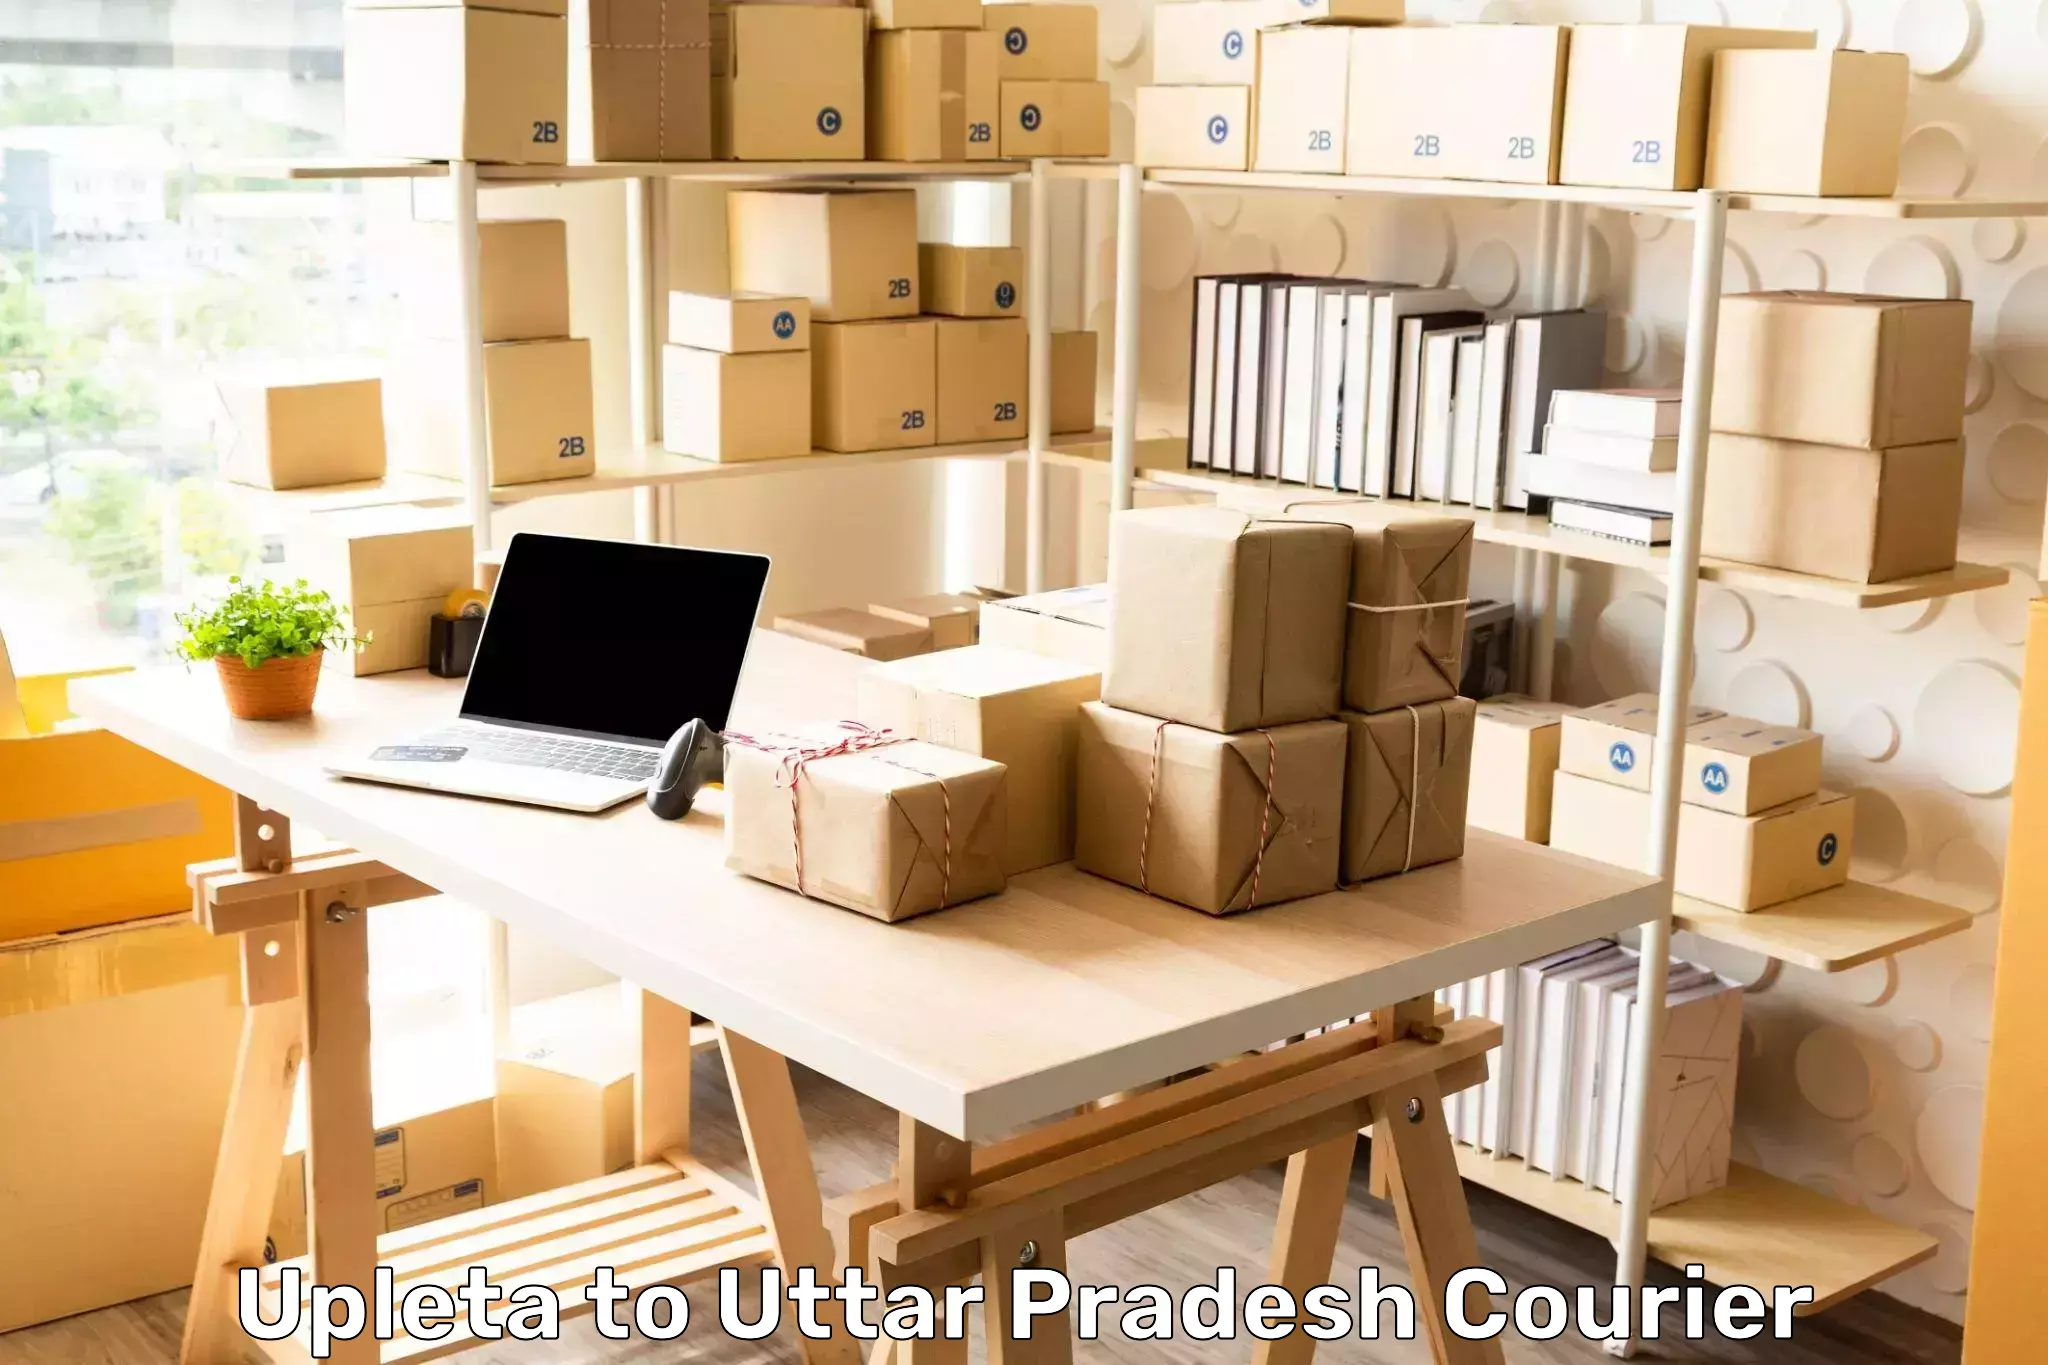 High-capacity courier solutions in Upleta to Atarra